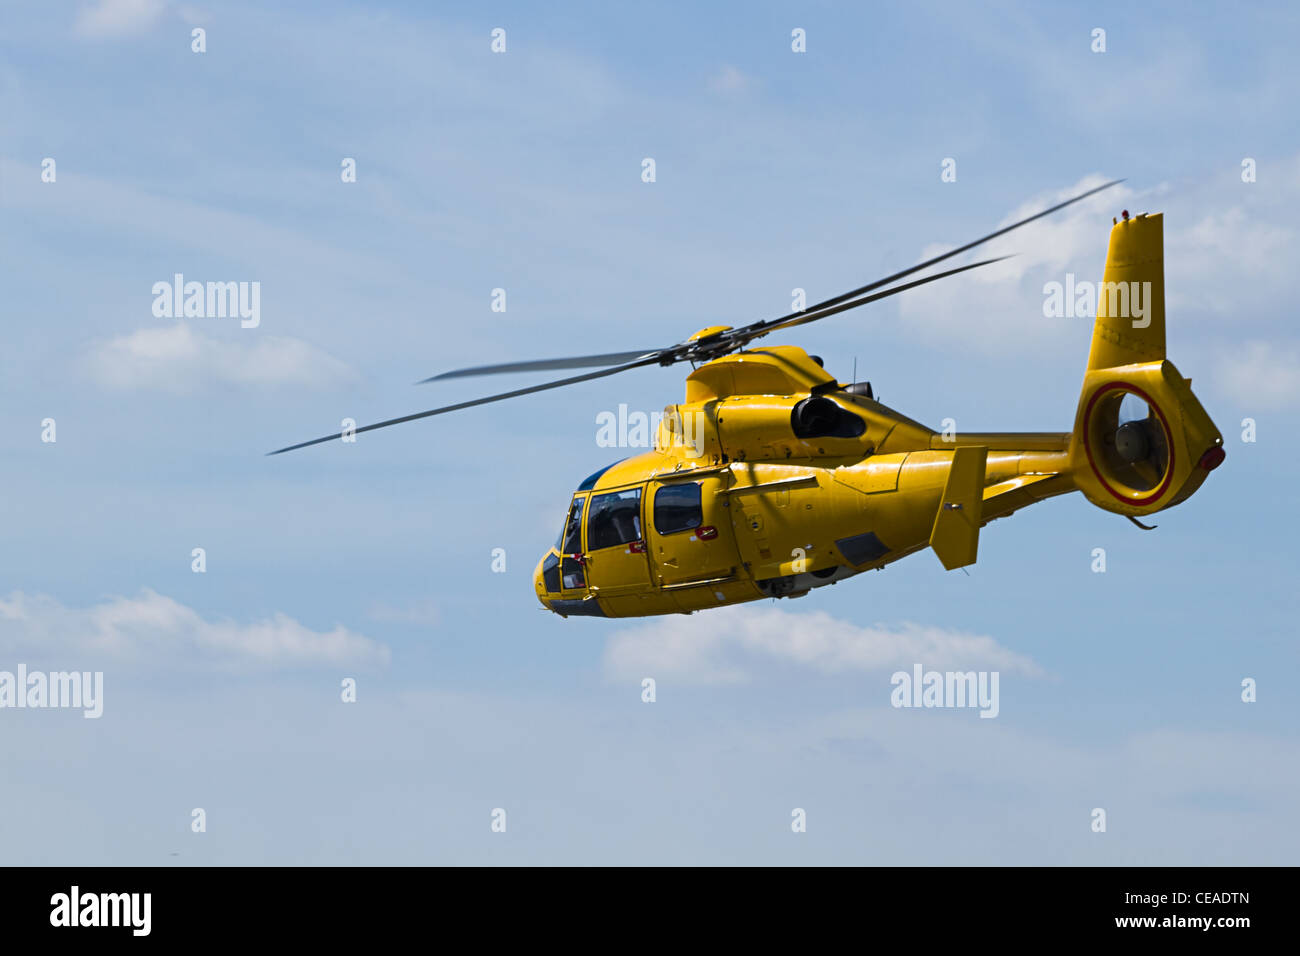 Yellow Helicopter flying in cloudy sky Stock Photo